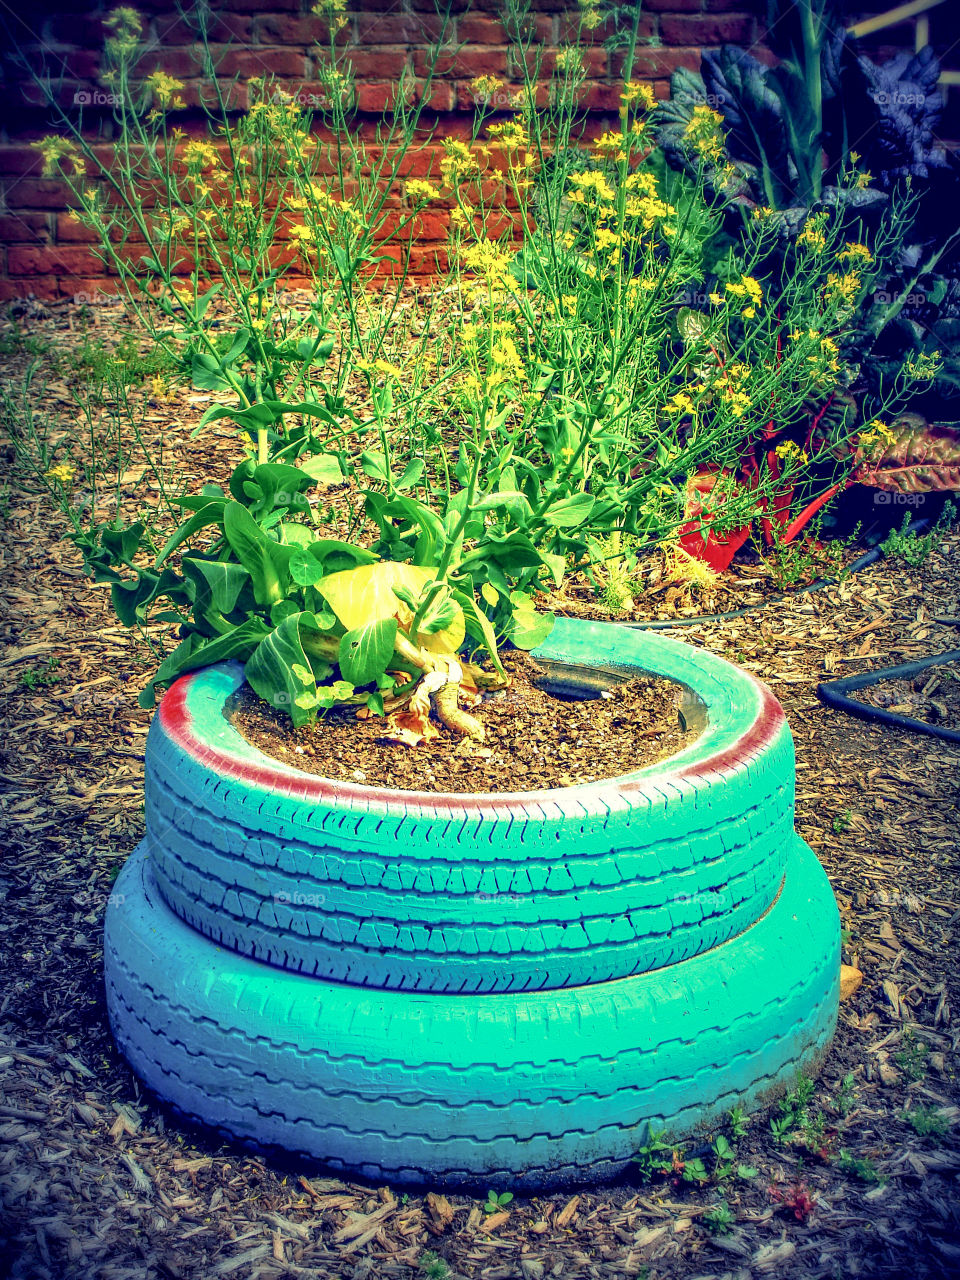 Yellow flowers bloom in an upcycled rubber tire planter.